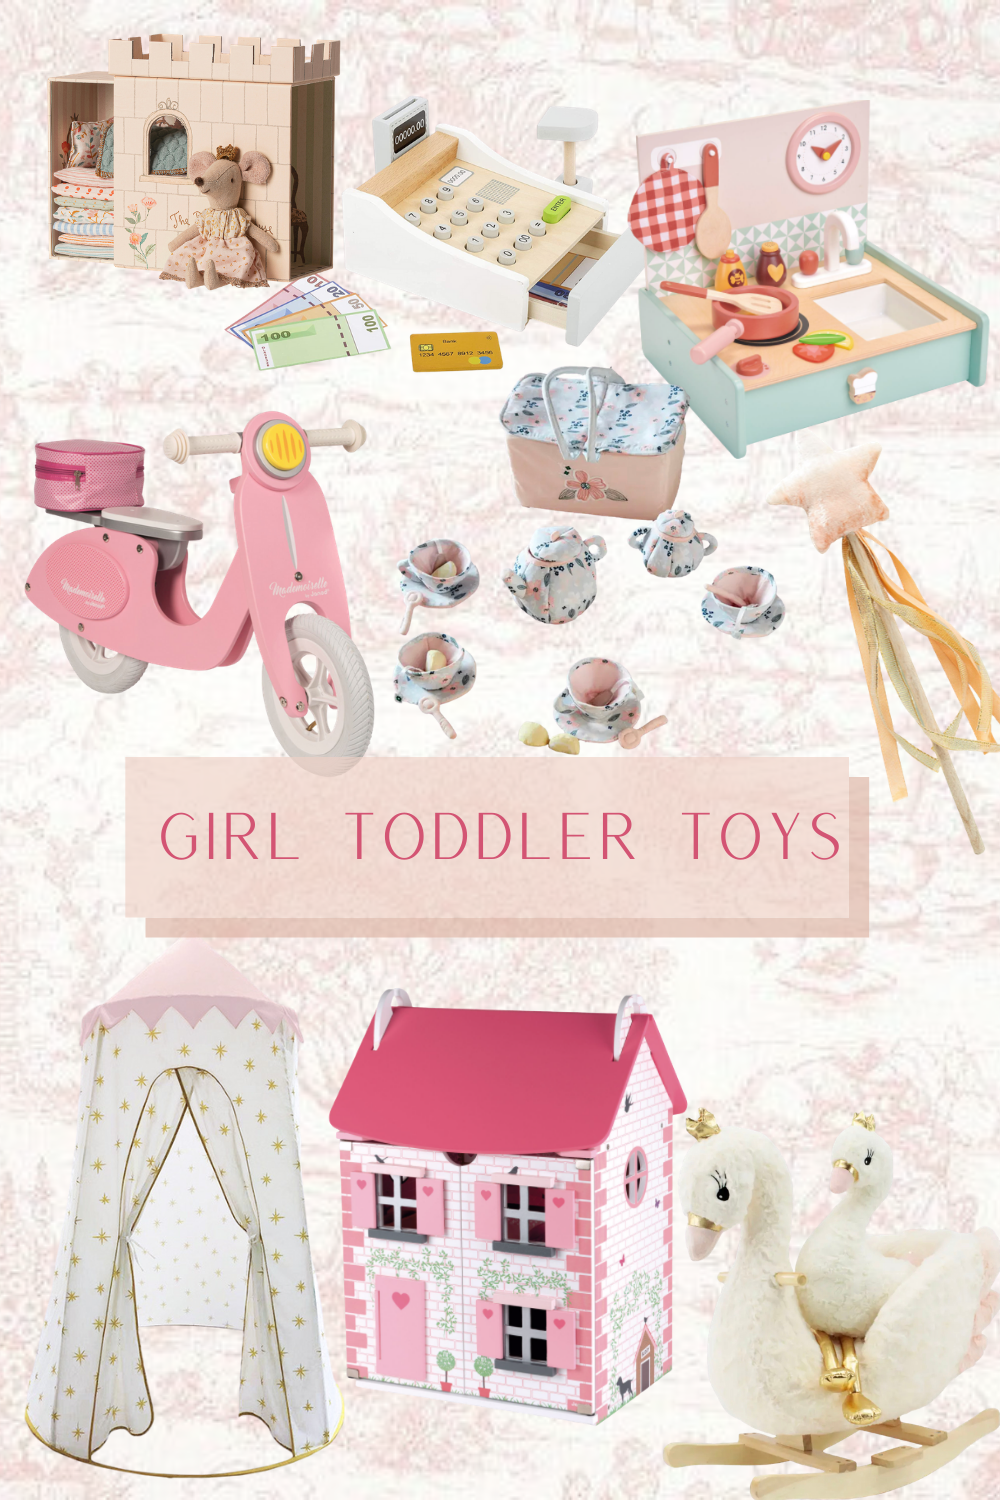 Little Girl Holiday Toy Gift Guide #toddlertoys #toddlergifts